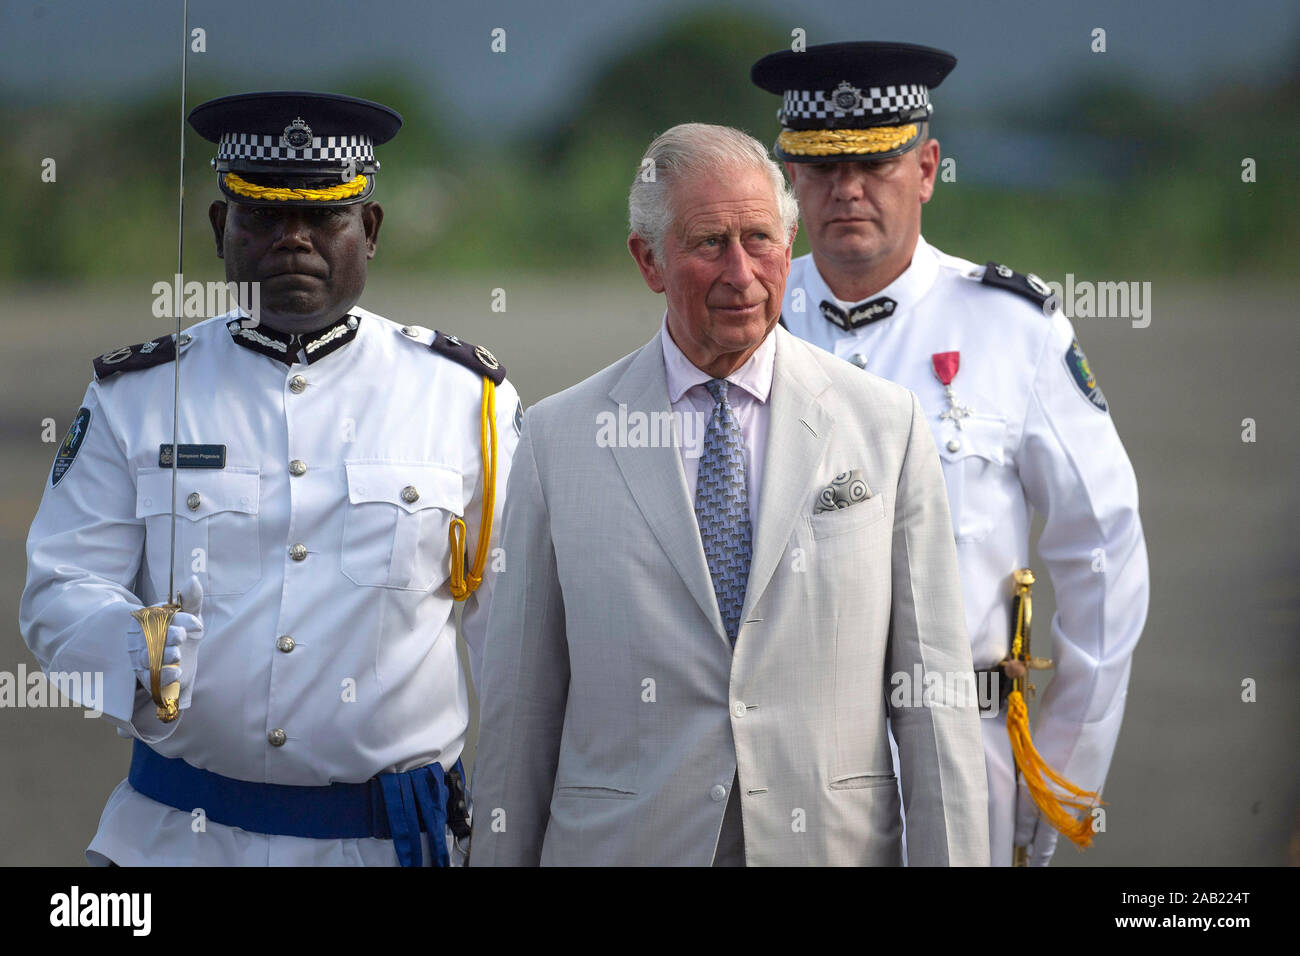 The Prince of Wales inspects the guard at Honiara International Airport in Honiara, as he prepares to depart following a three day royal visit to the Solomon Islands. PA Photo. Picture date: Monday November 25, 2019. See PA story ROYAL Charles. Photo credit should read: Victoria Jones/PA Wire Stock Photo